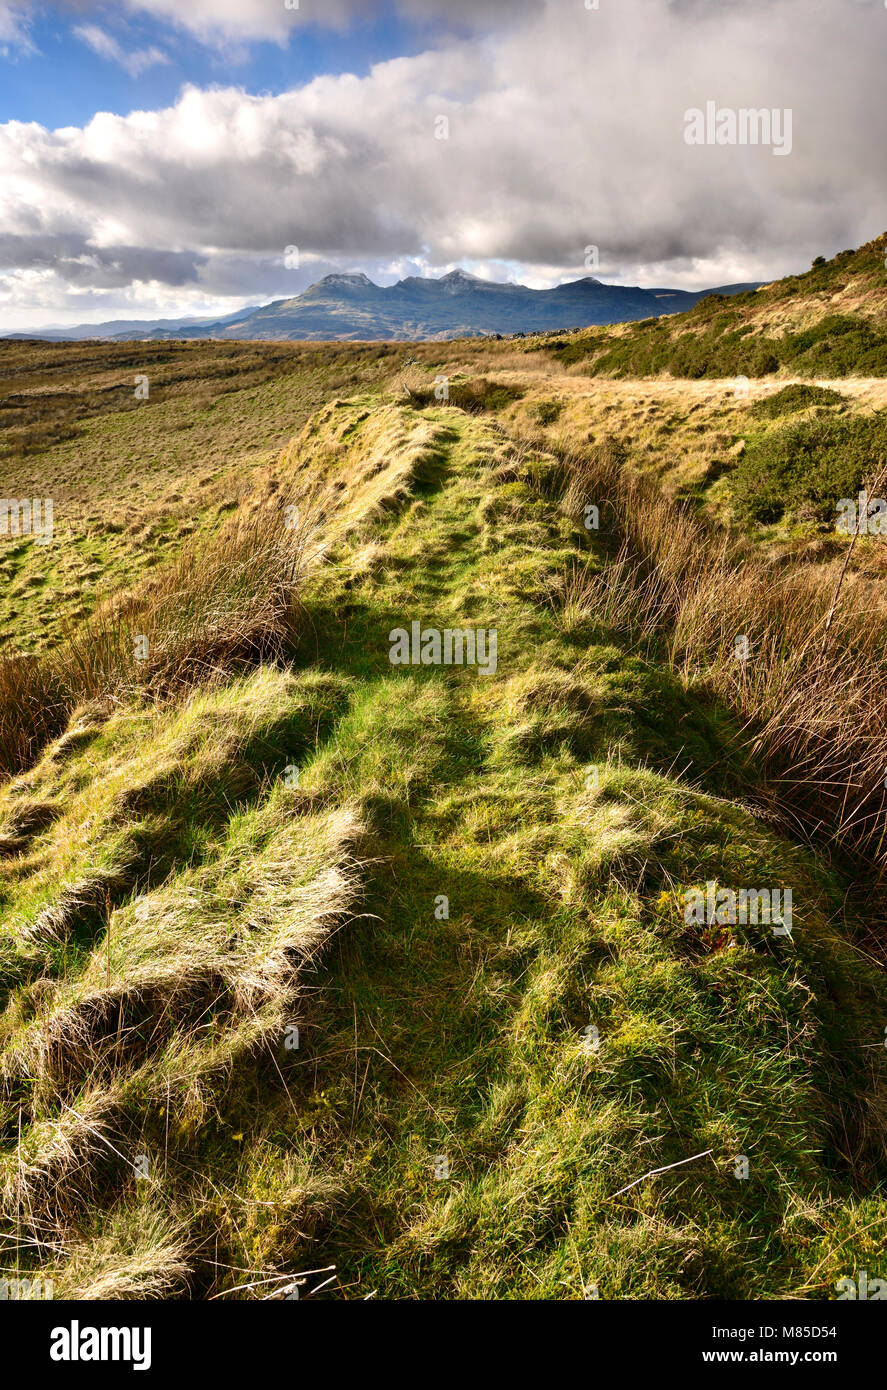 A winter view across moorland of the Snowdonia Mountains in North Wales, UK. Stock Photo